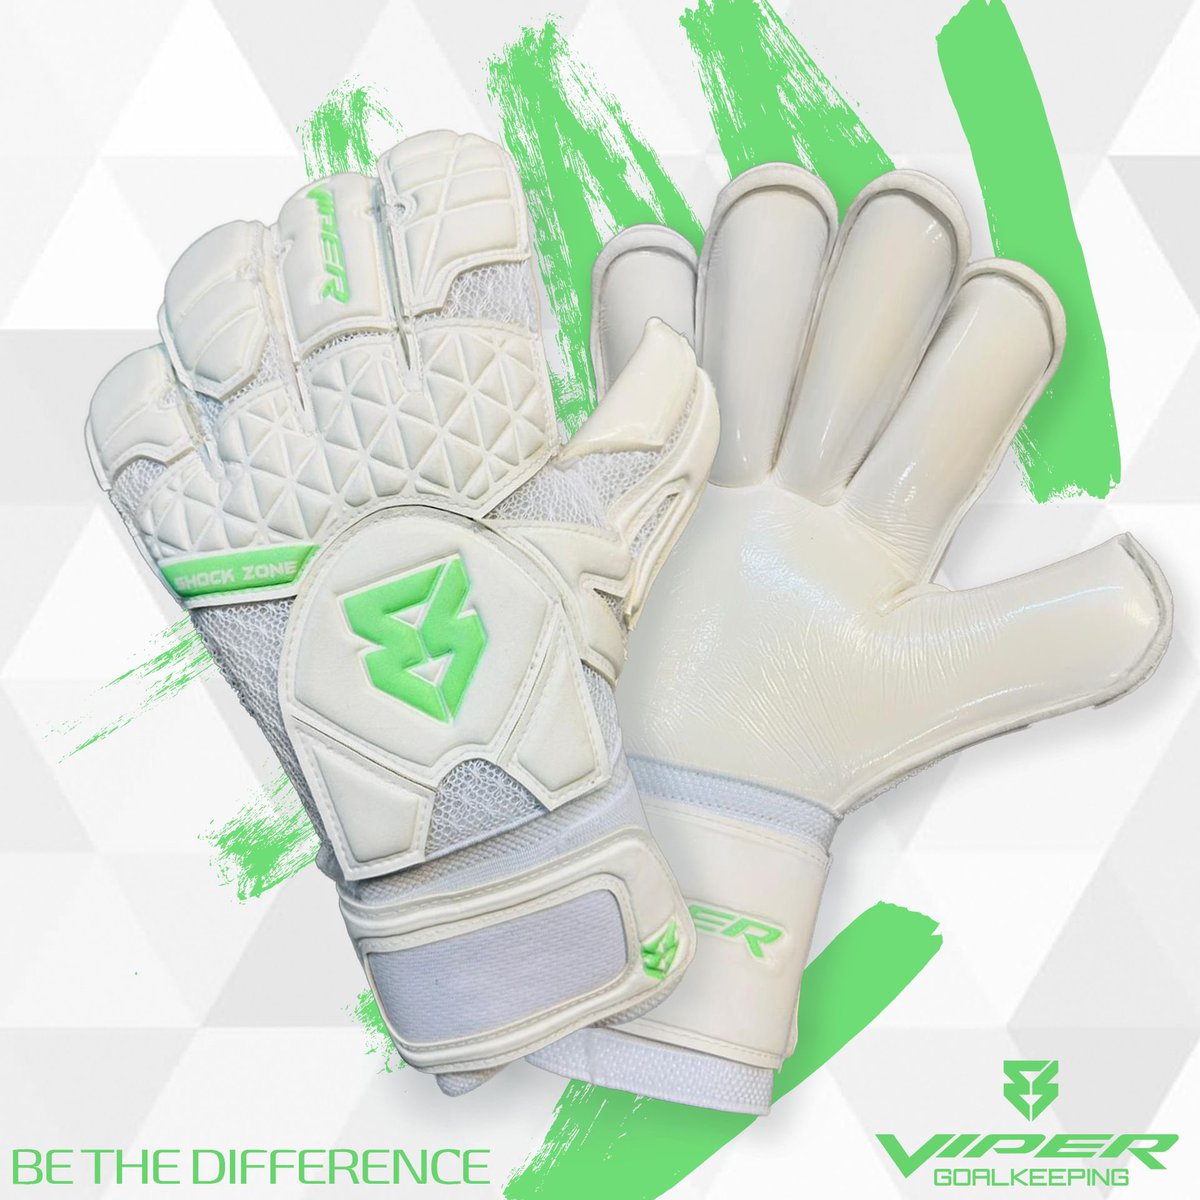 🏴󠁧󠁢󠁥󠁮󠁧󠁿 COMPETITION 🏴󠁧󠁢󠁥󠁮󠁧󠁿 If England keep a clean sheet in against the USA we will giveaway a pair of our VC gloves! To enter simply - Follow us ✅ Retweet this post ✅ Comment with your glove size ✅ Winner announced after the game! Good Luck 🏴󠁧󠁢󠁥󠁮󠁧󠁿